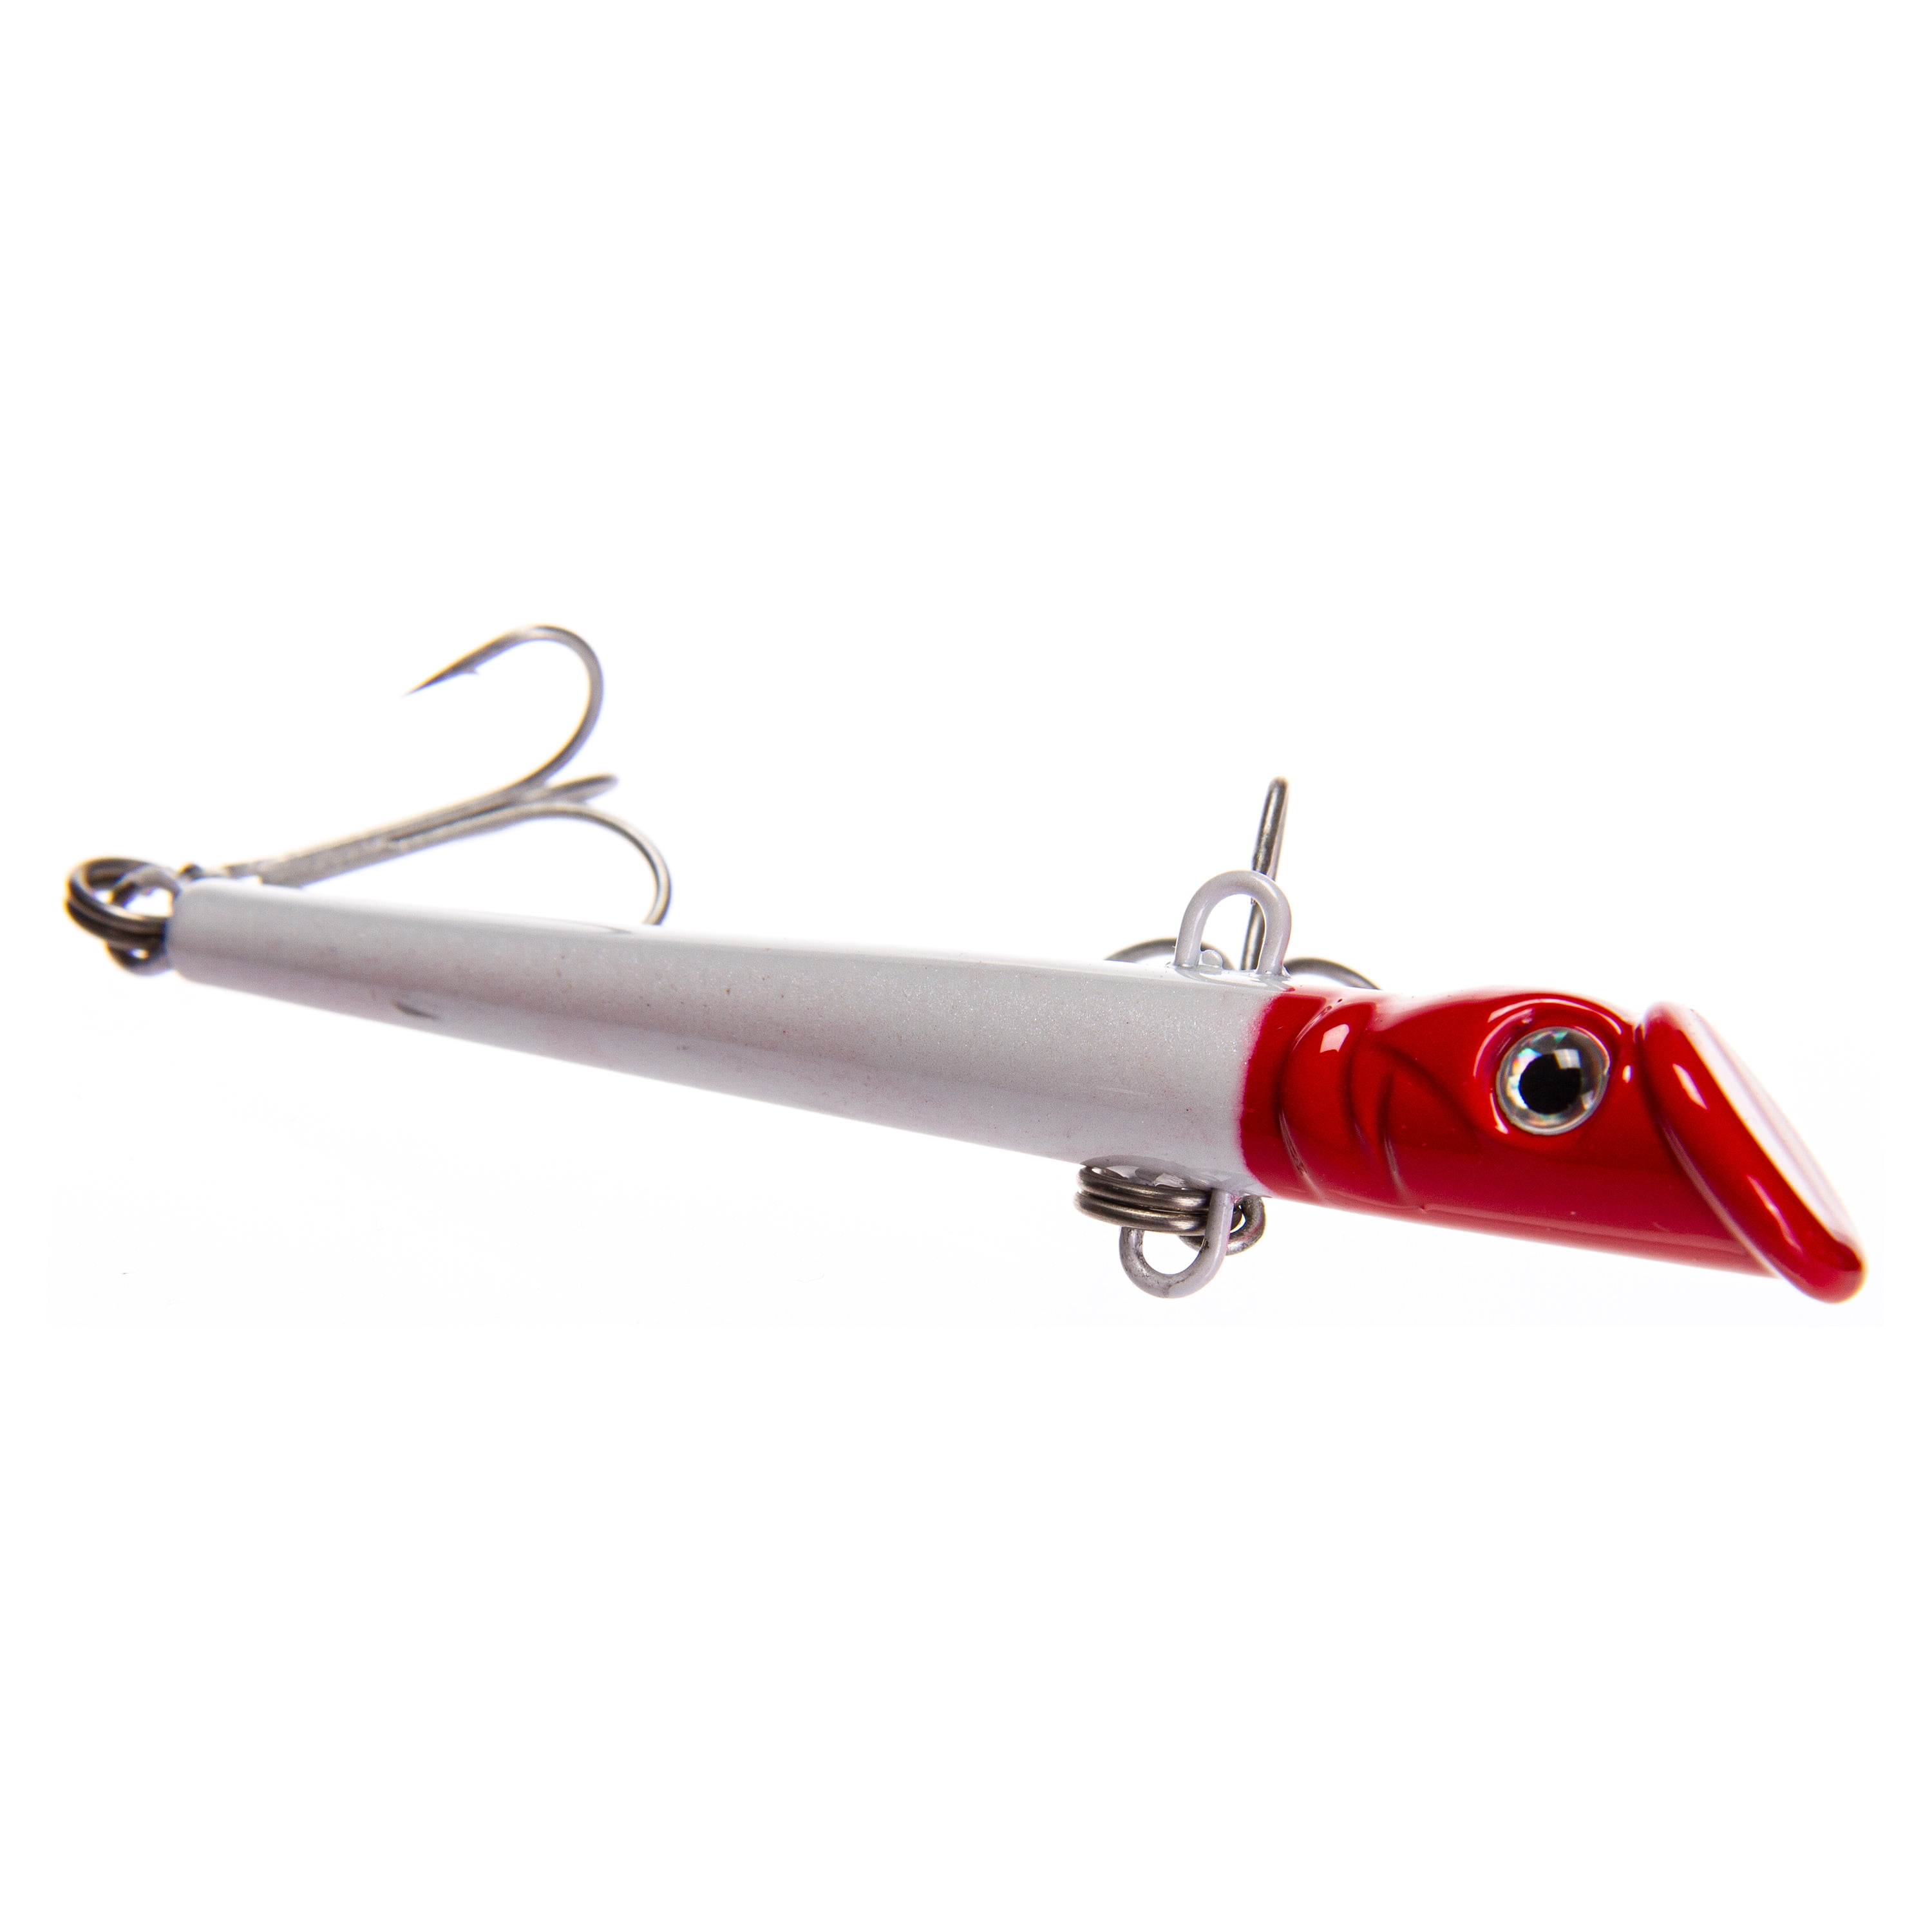 Ozark Trails 1 ounce Saltwater Inshore Fishing Jigging Lure, In fish  attracting colors. Red head White body color. 